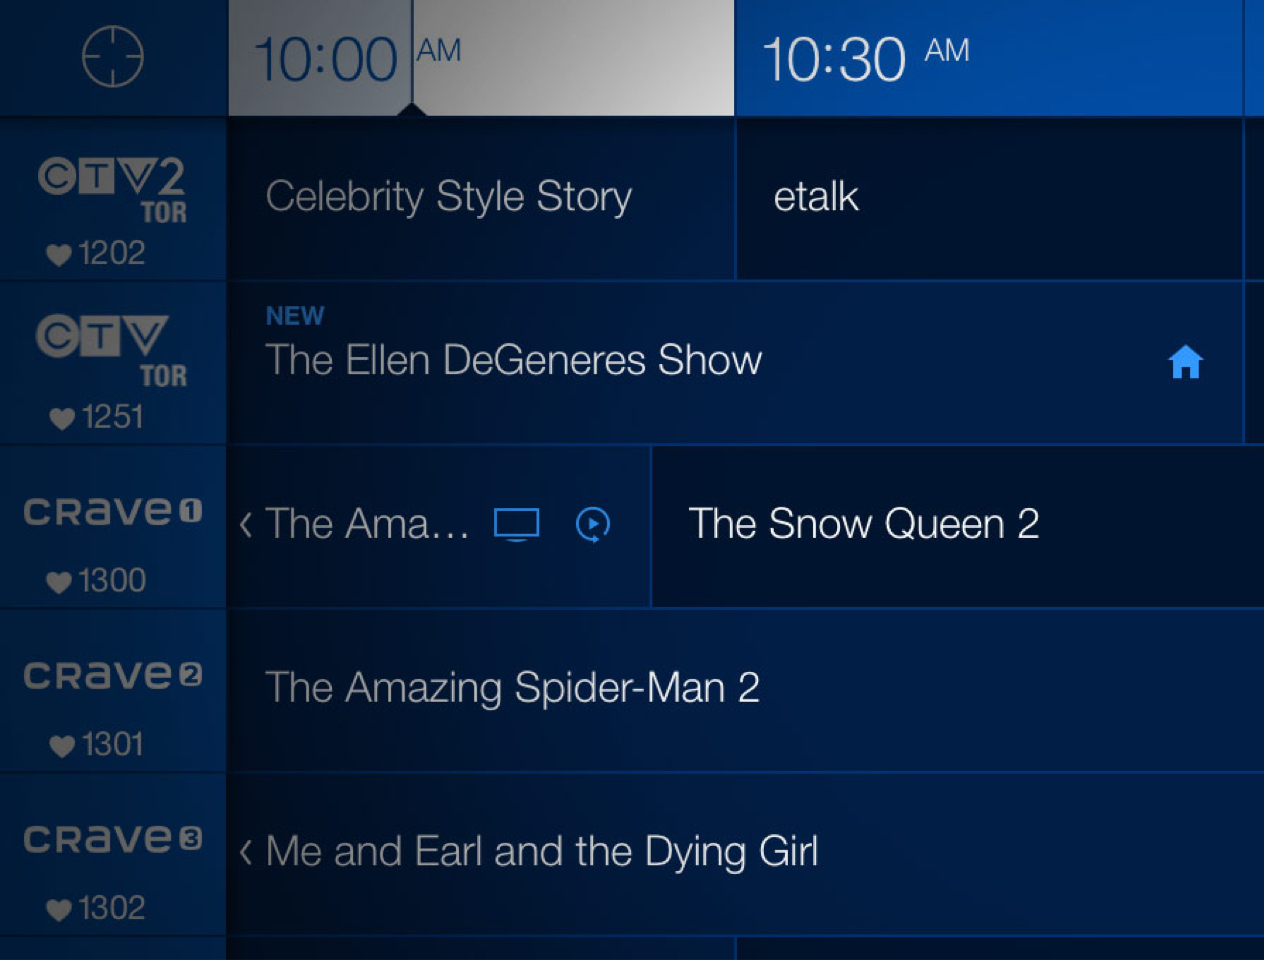 A TV guide showing channels and shows by hour.